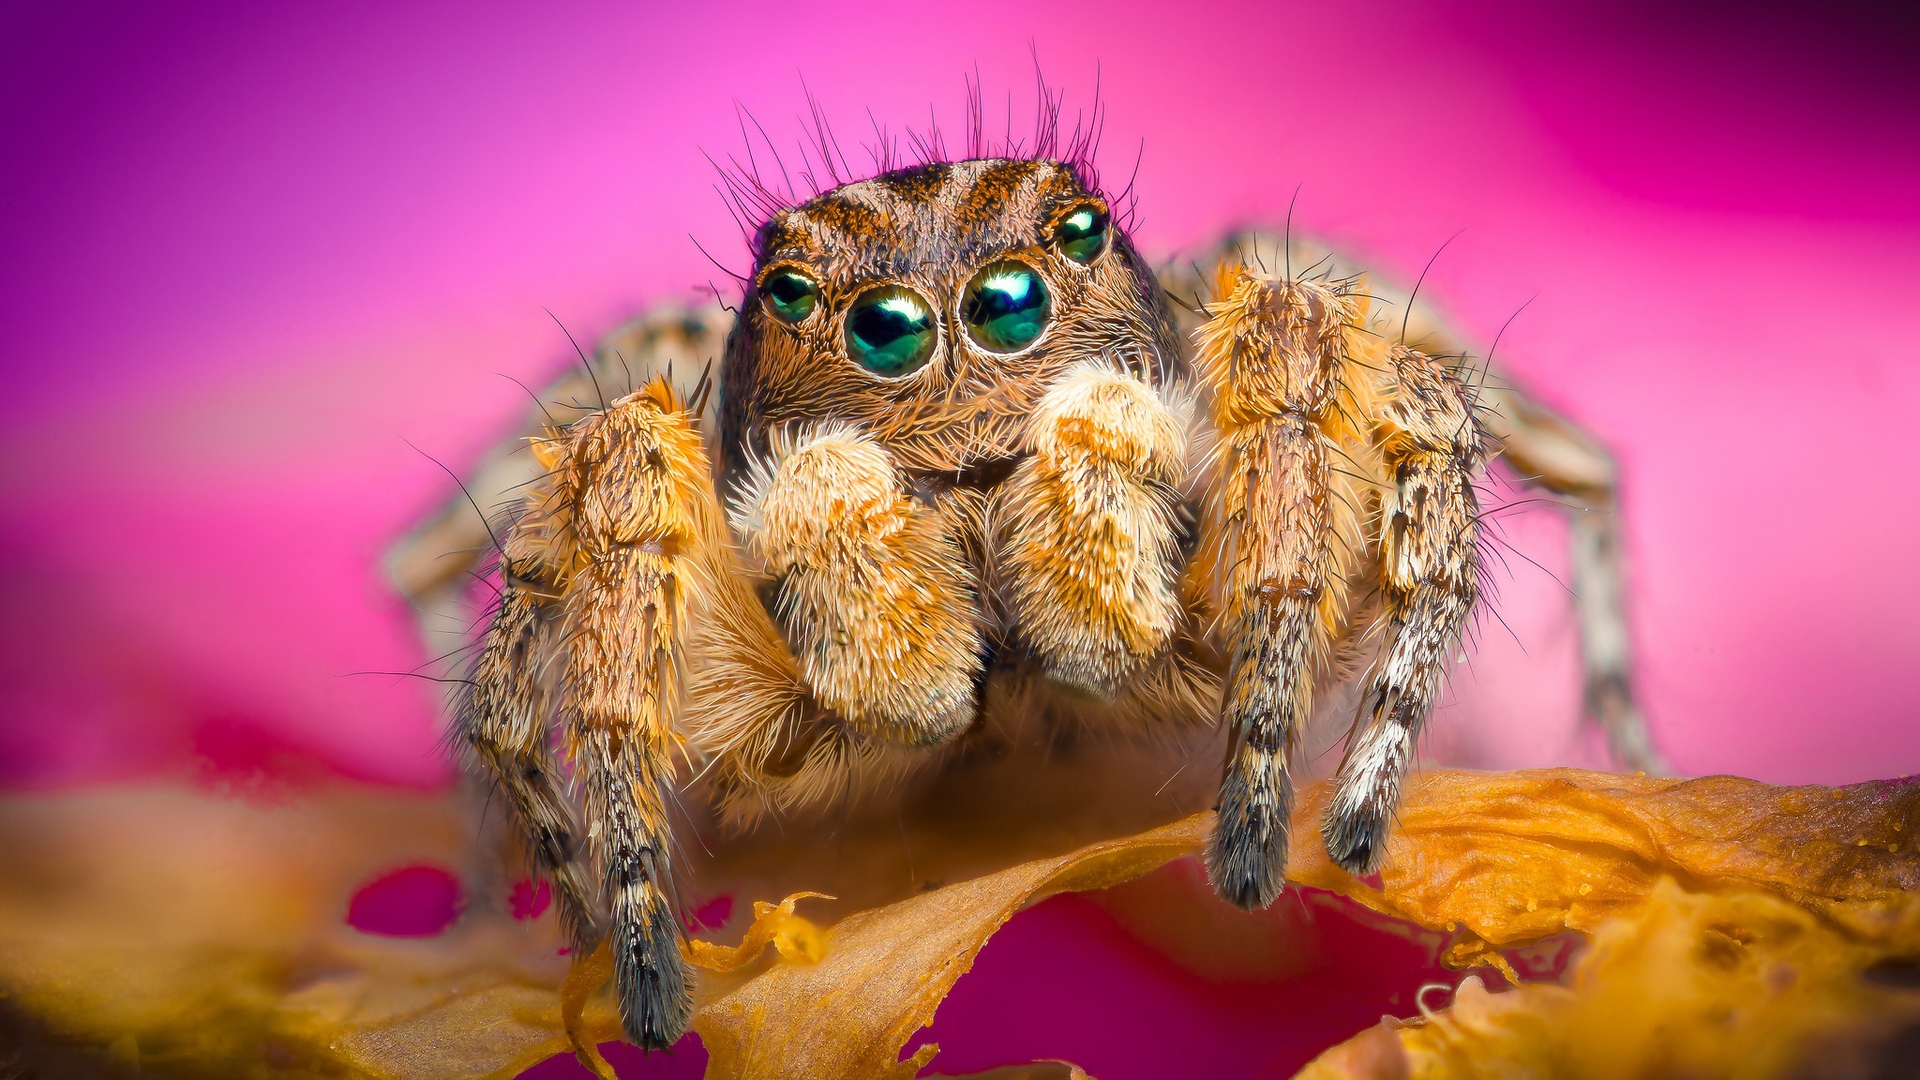 Jumping Spider for 1920 x 1080 HDTV 1080p resolution